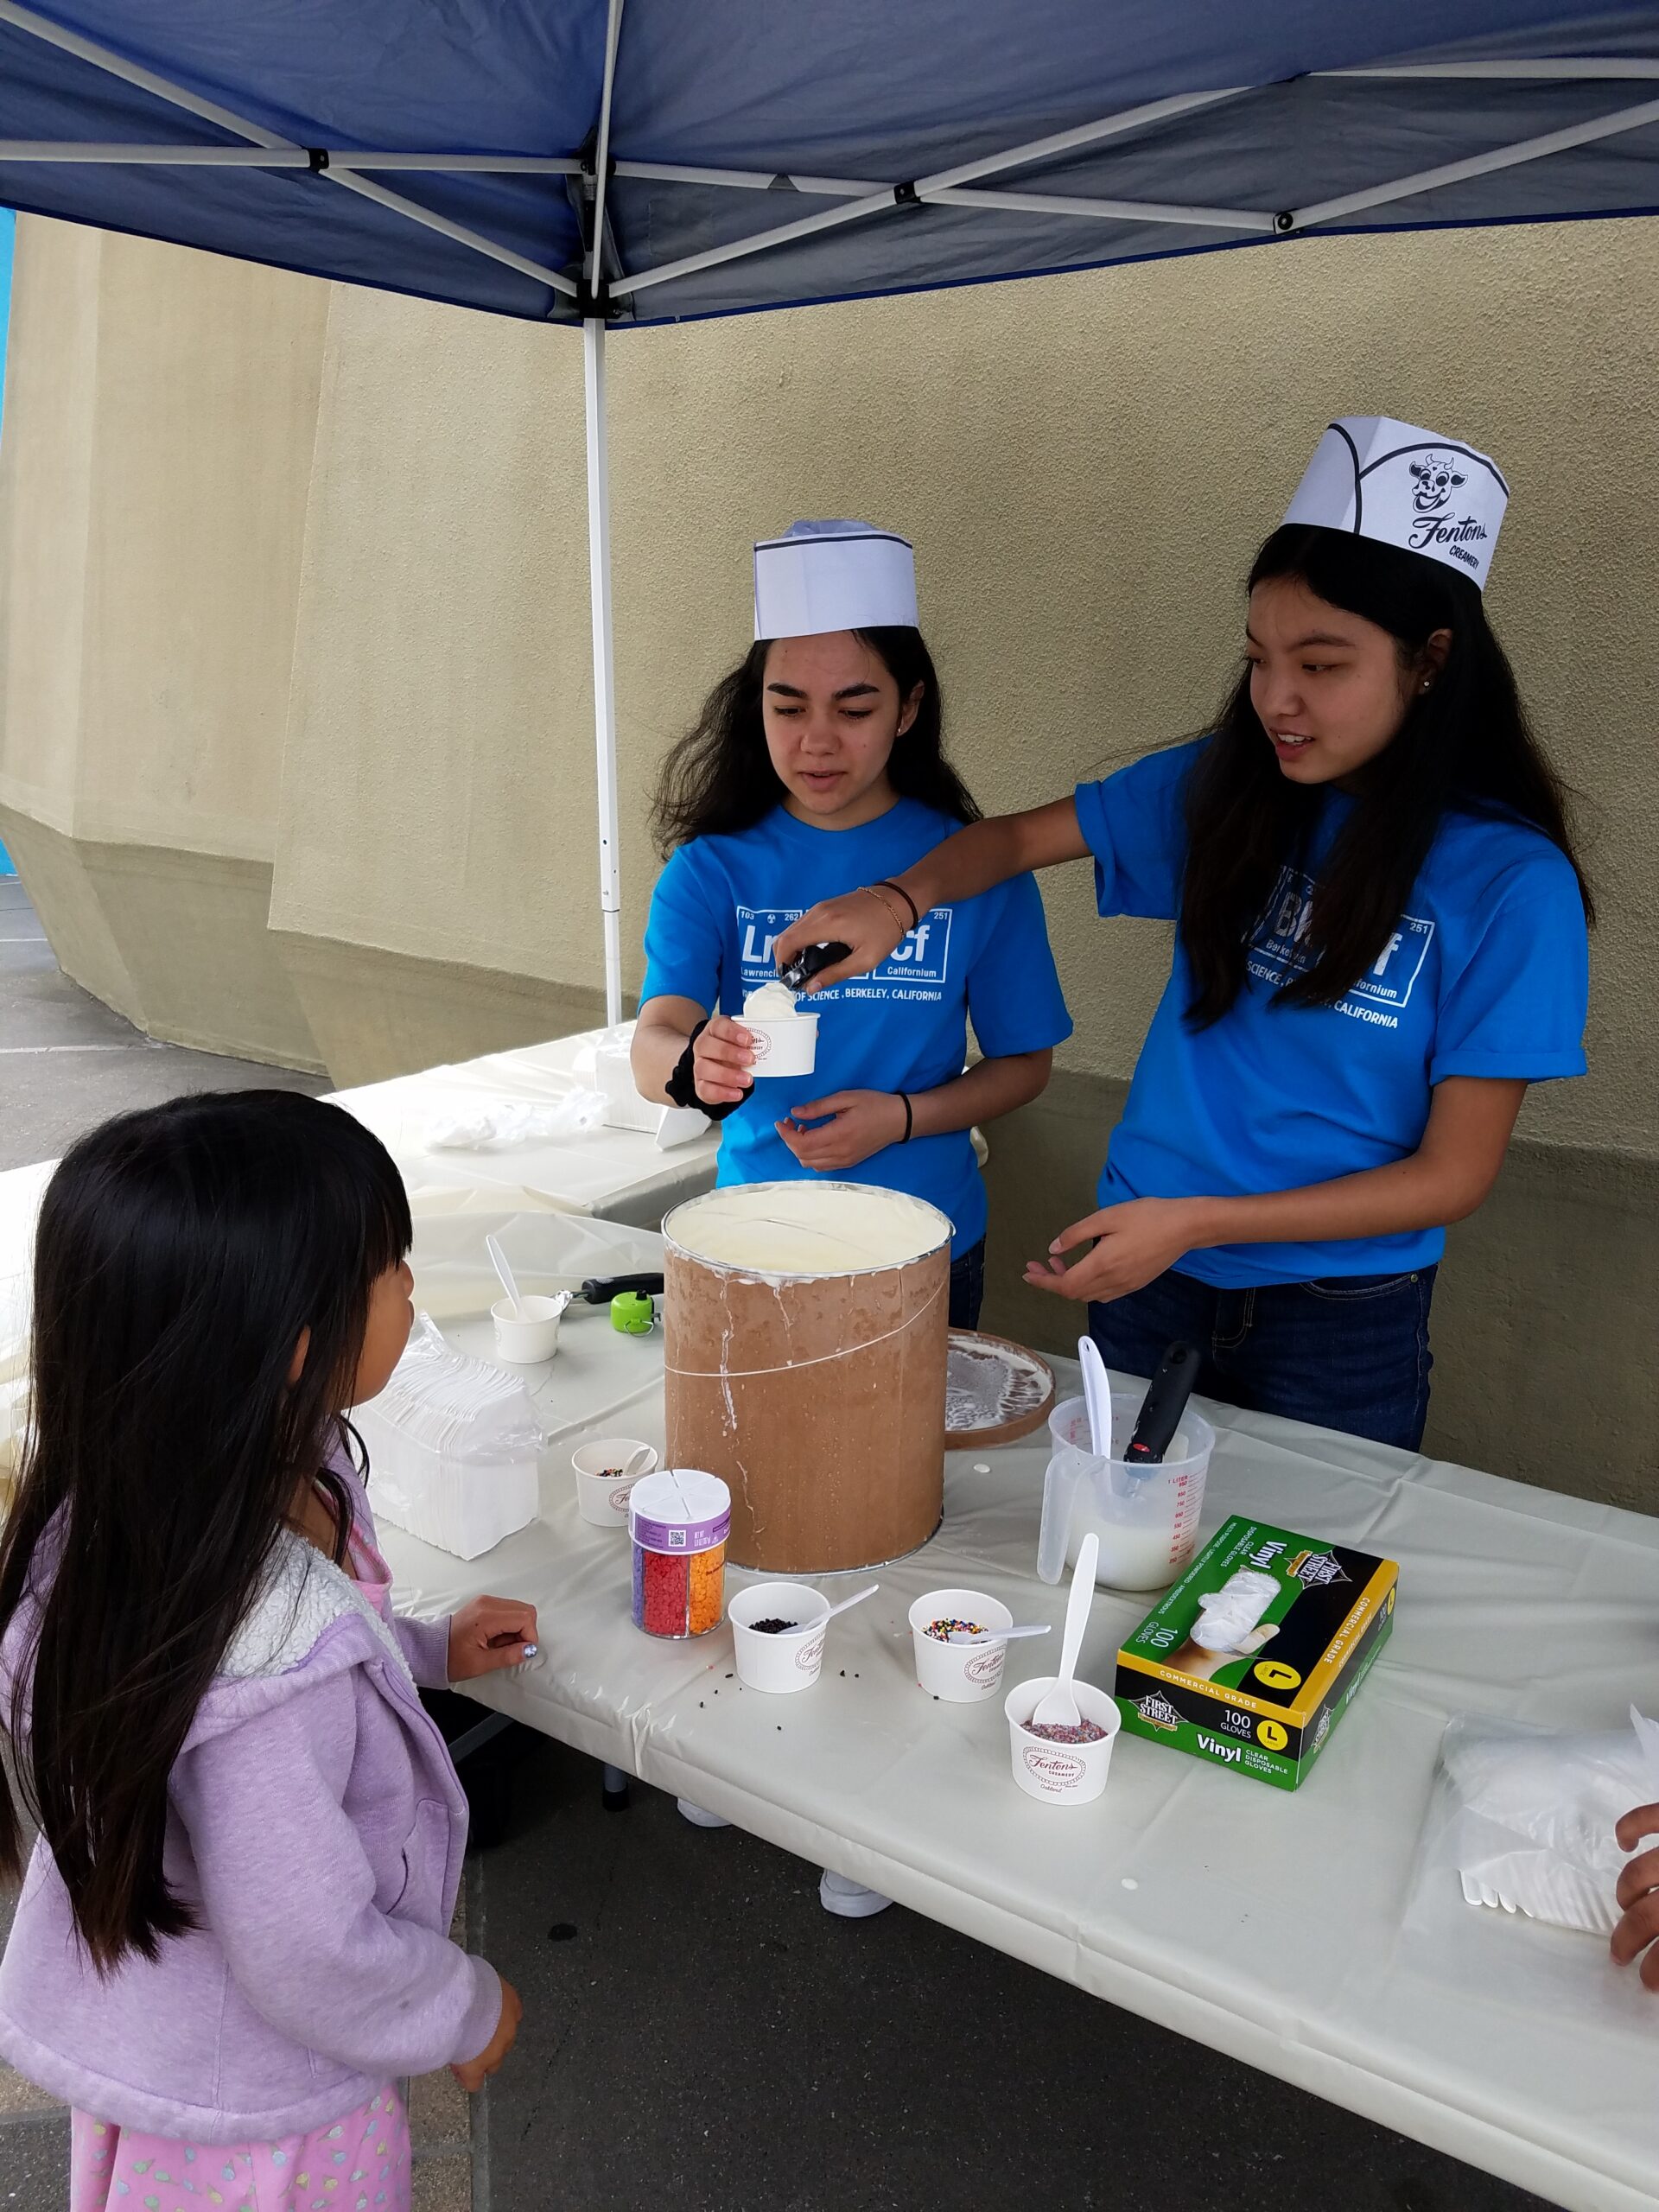 Two Lawrence Hall of Science volunteers serve ice cream to a young visitor